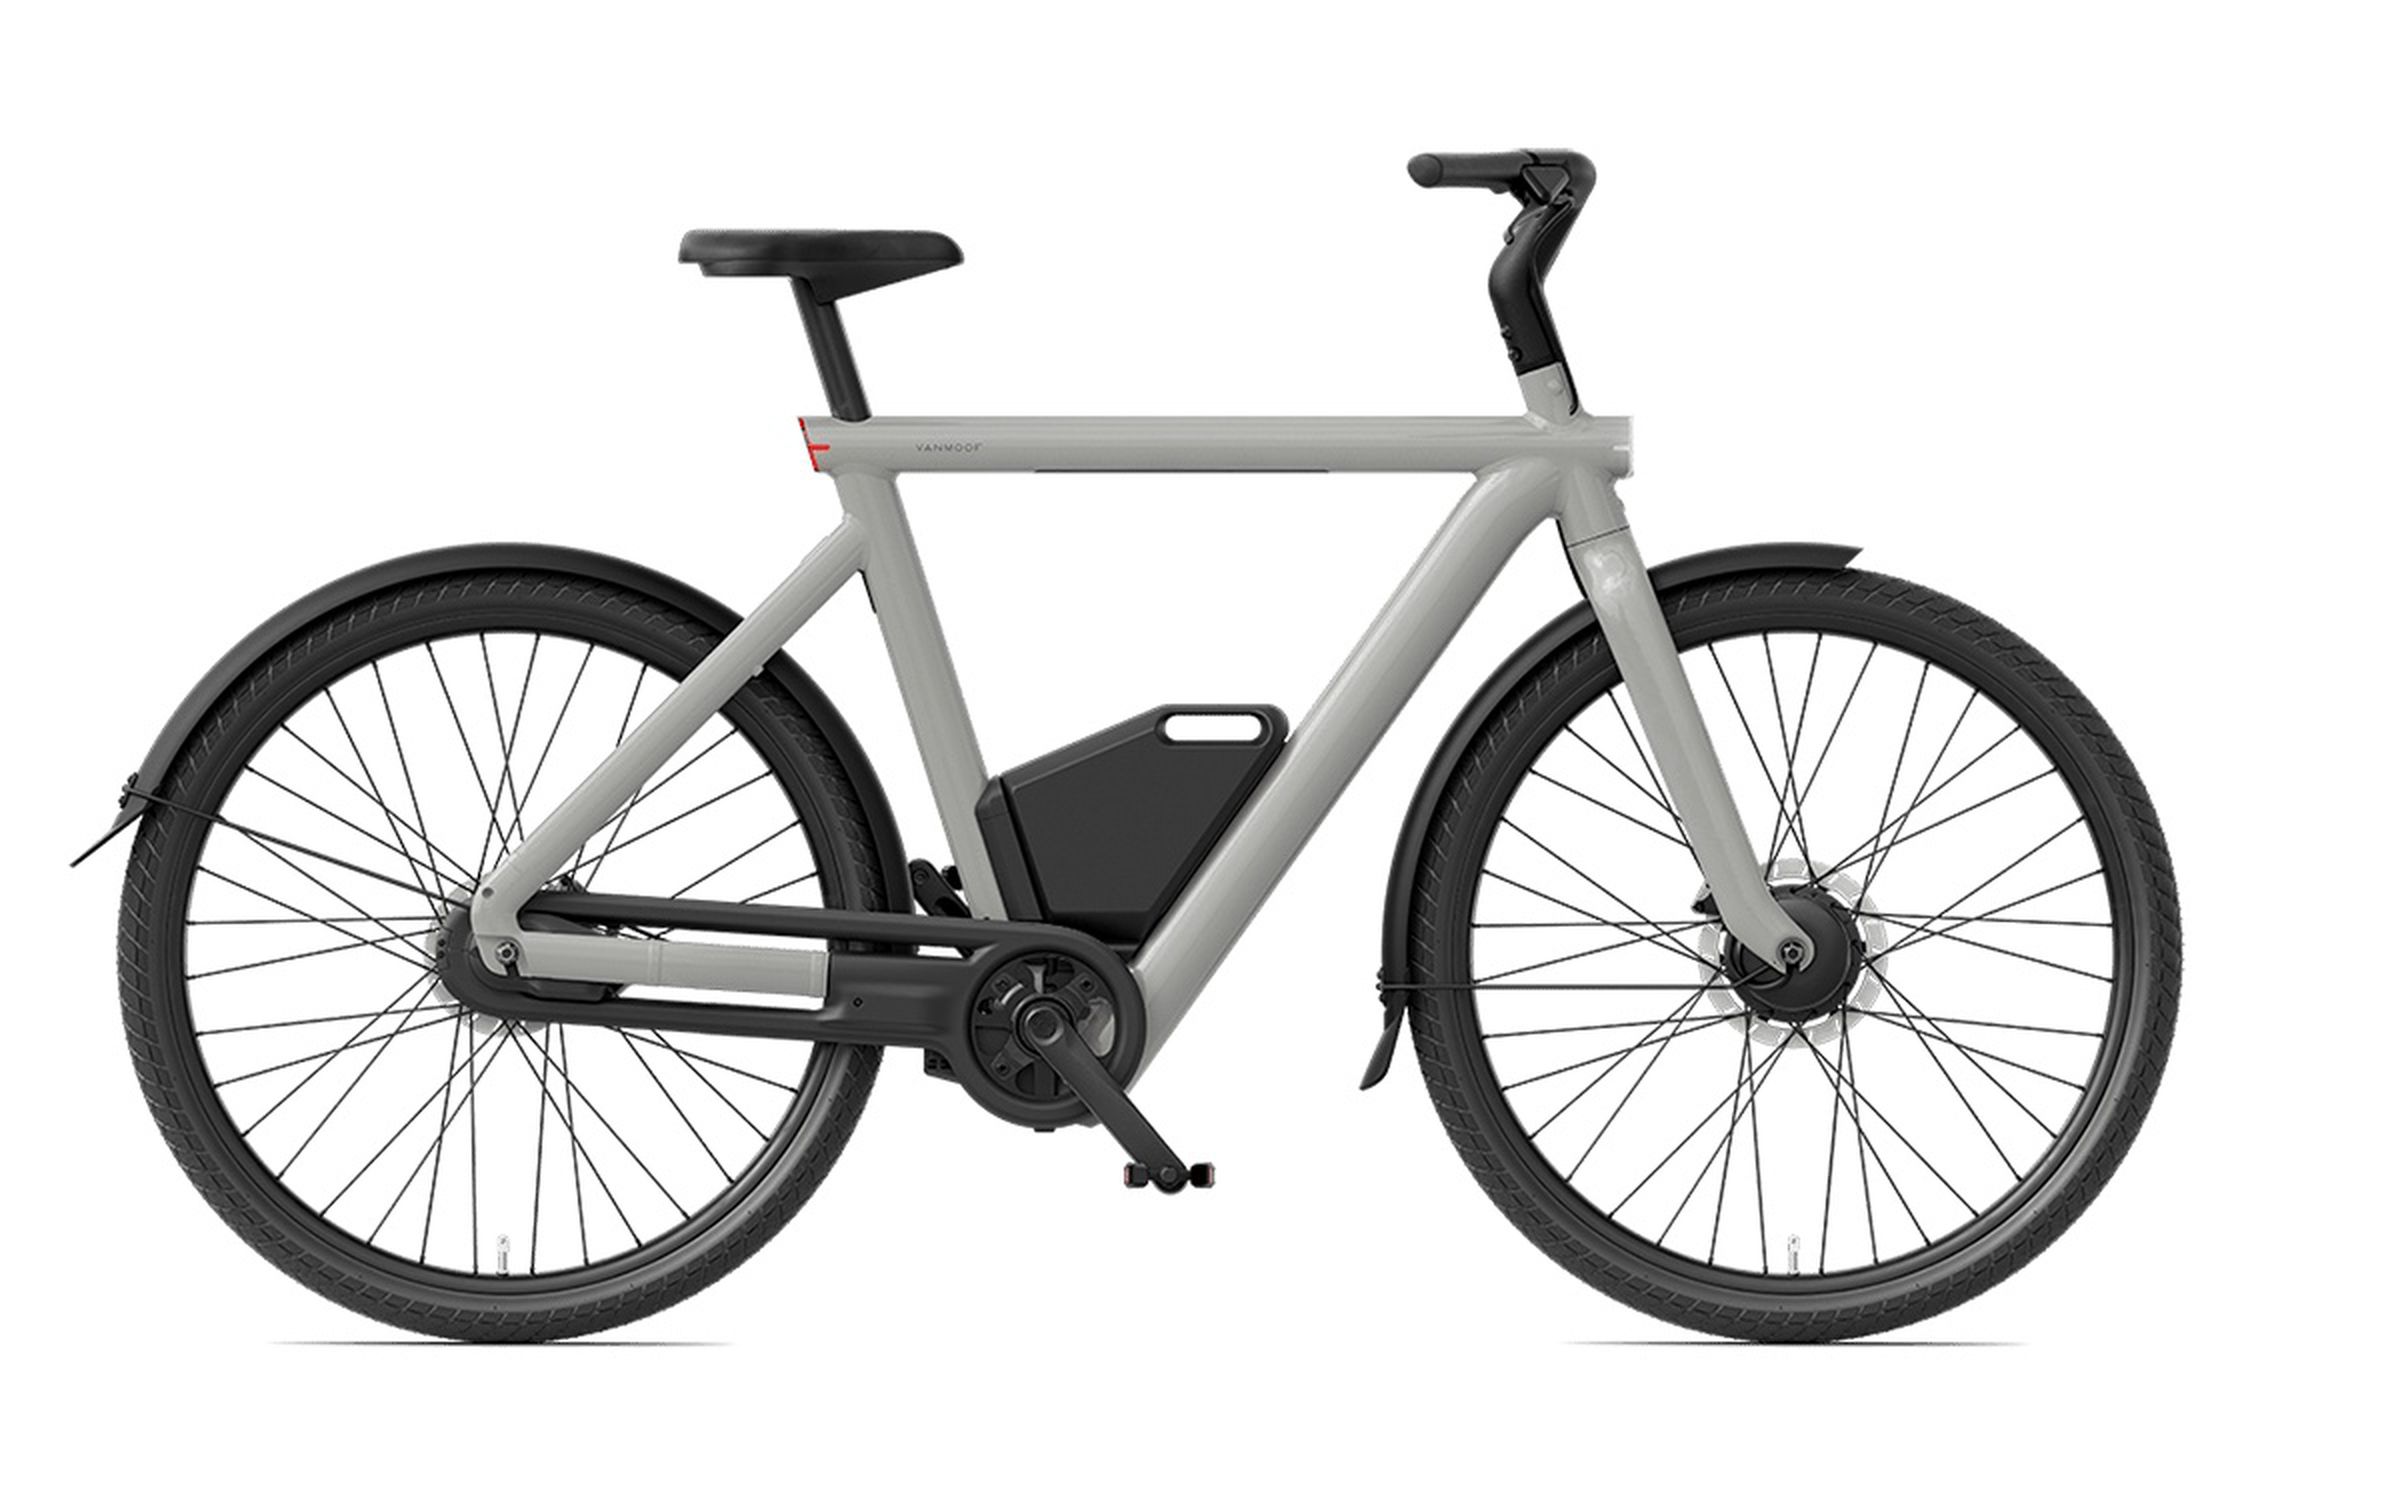 VanMoof S5 fitted with new “Click-On” extended battery.